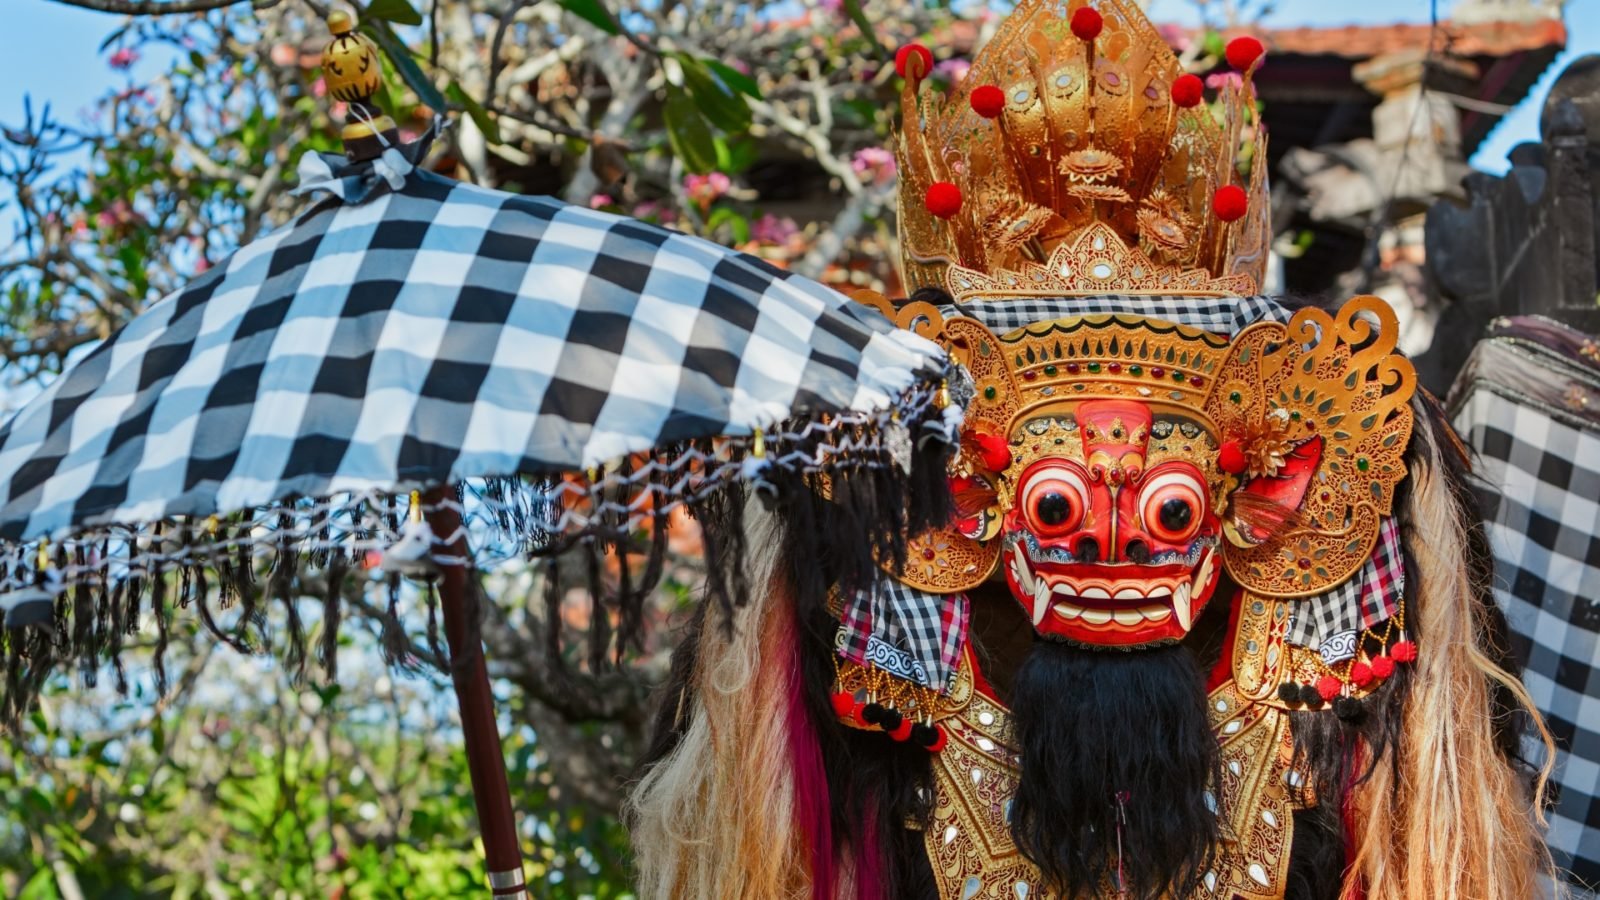 The experience of a traditional Barong and Trance Dance in the middle of Kuta, Bali'